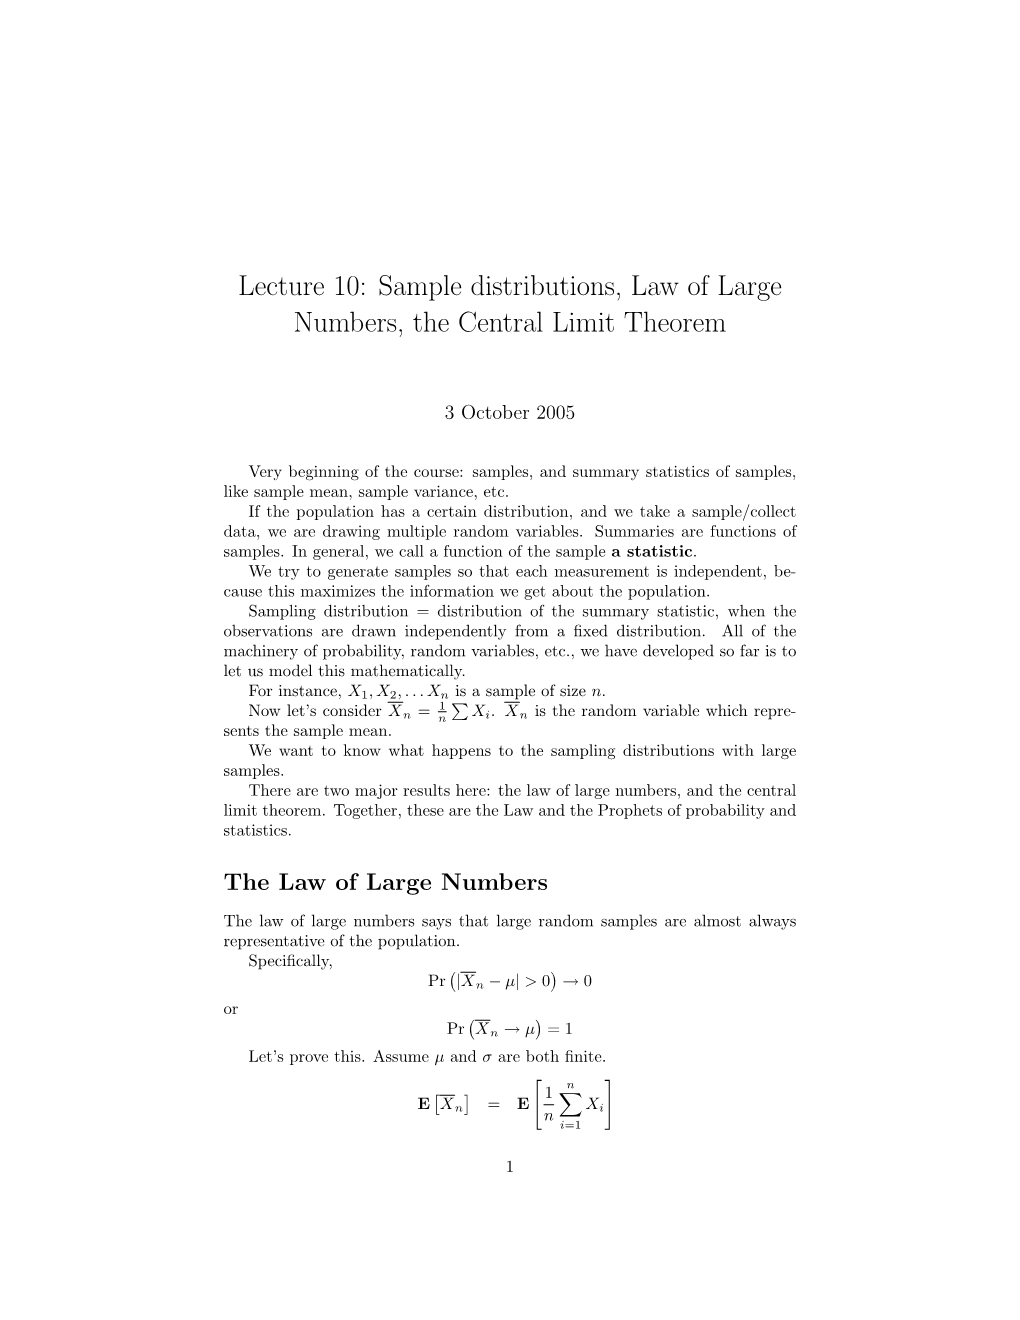 Sampling Distributions, Law of Large Numbers, Central Limit Theorem